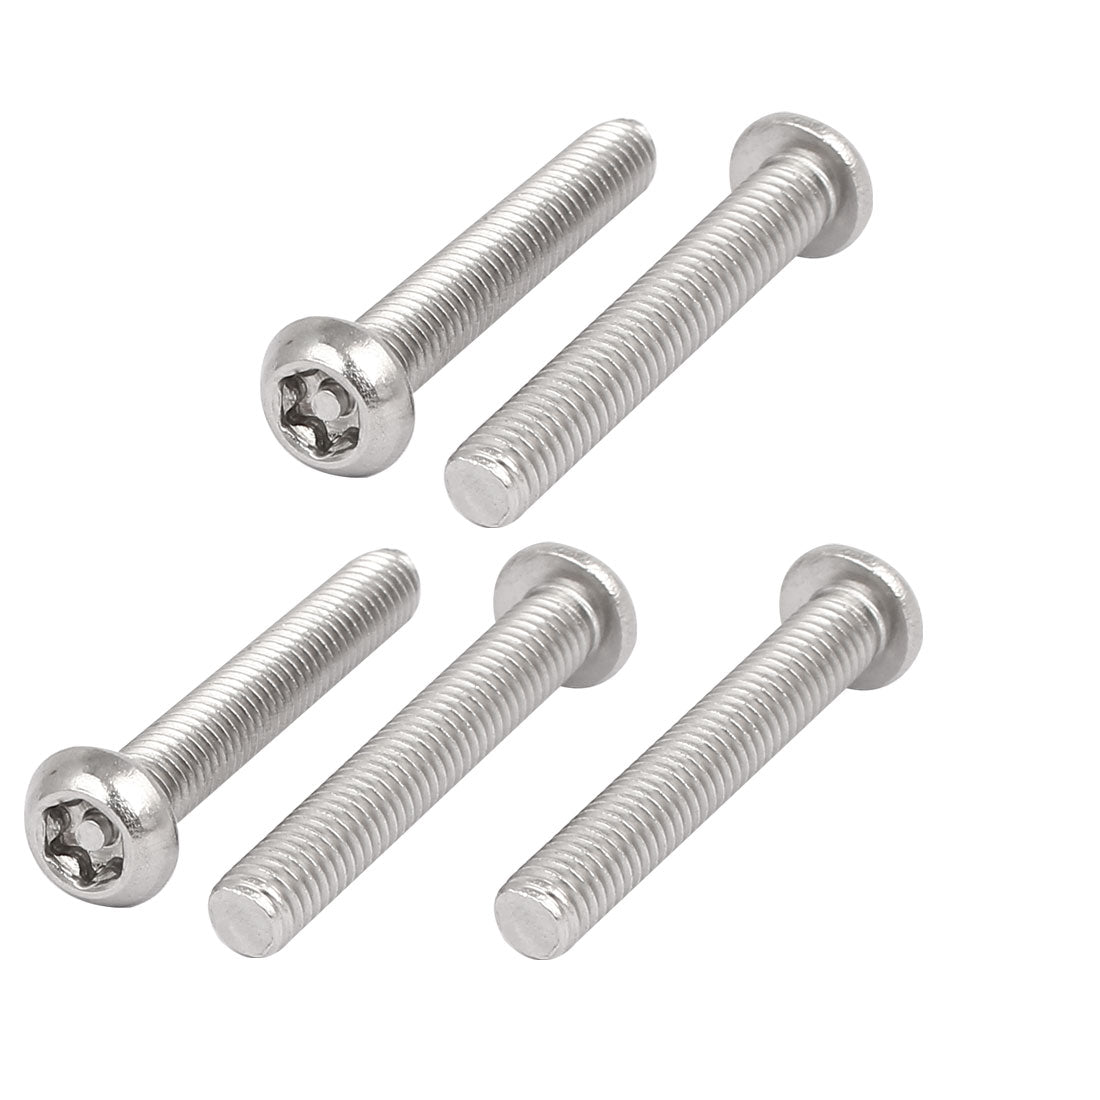 uxcell Uxcell M6x40mm 304 Stainless Steel Button Head Torx Security Tamper Proof Screws 5pcs